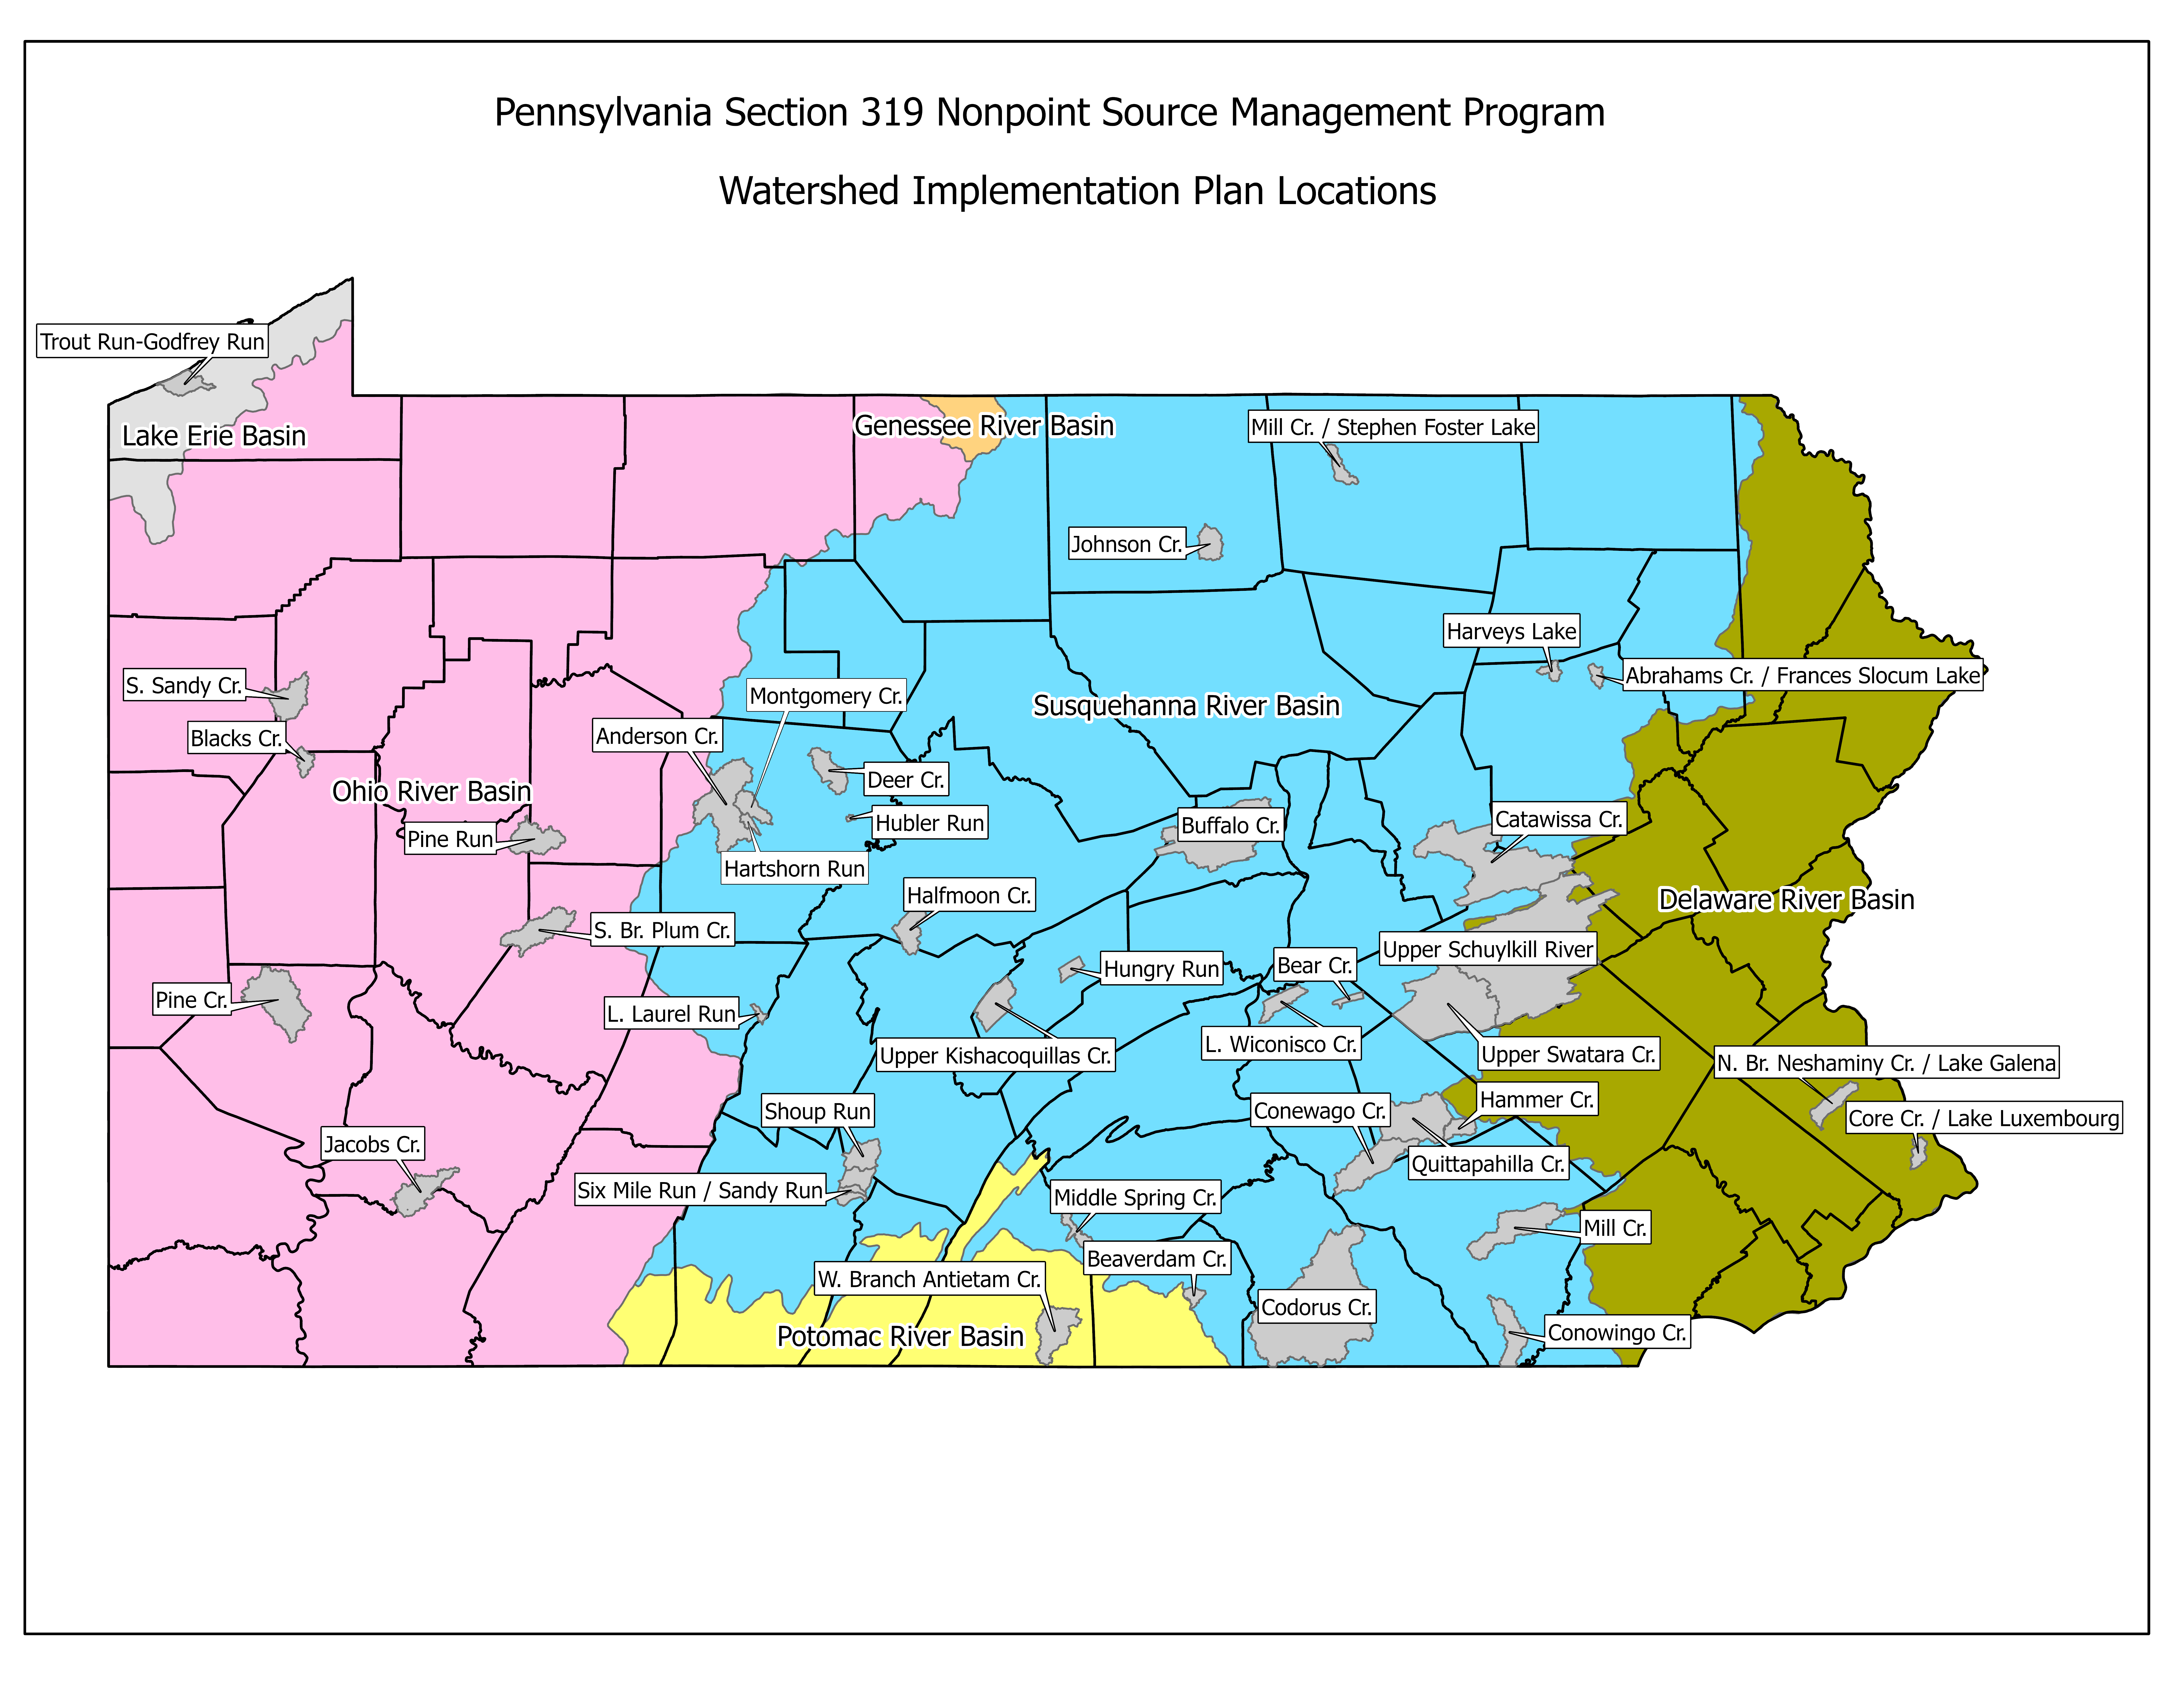 Pennsylvania Section 319 Nonpoint Source Management Program Watershed Implementation Plan Locations